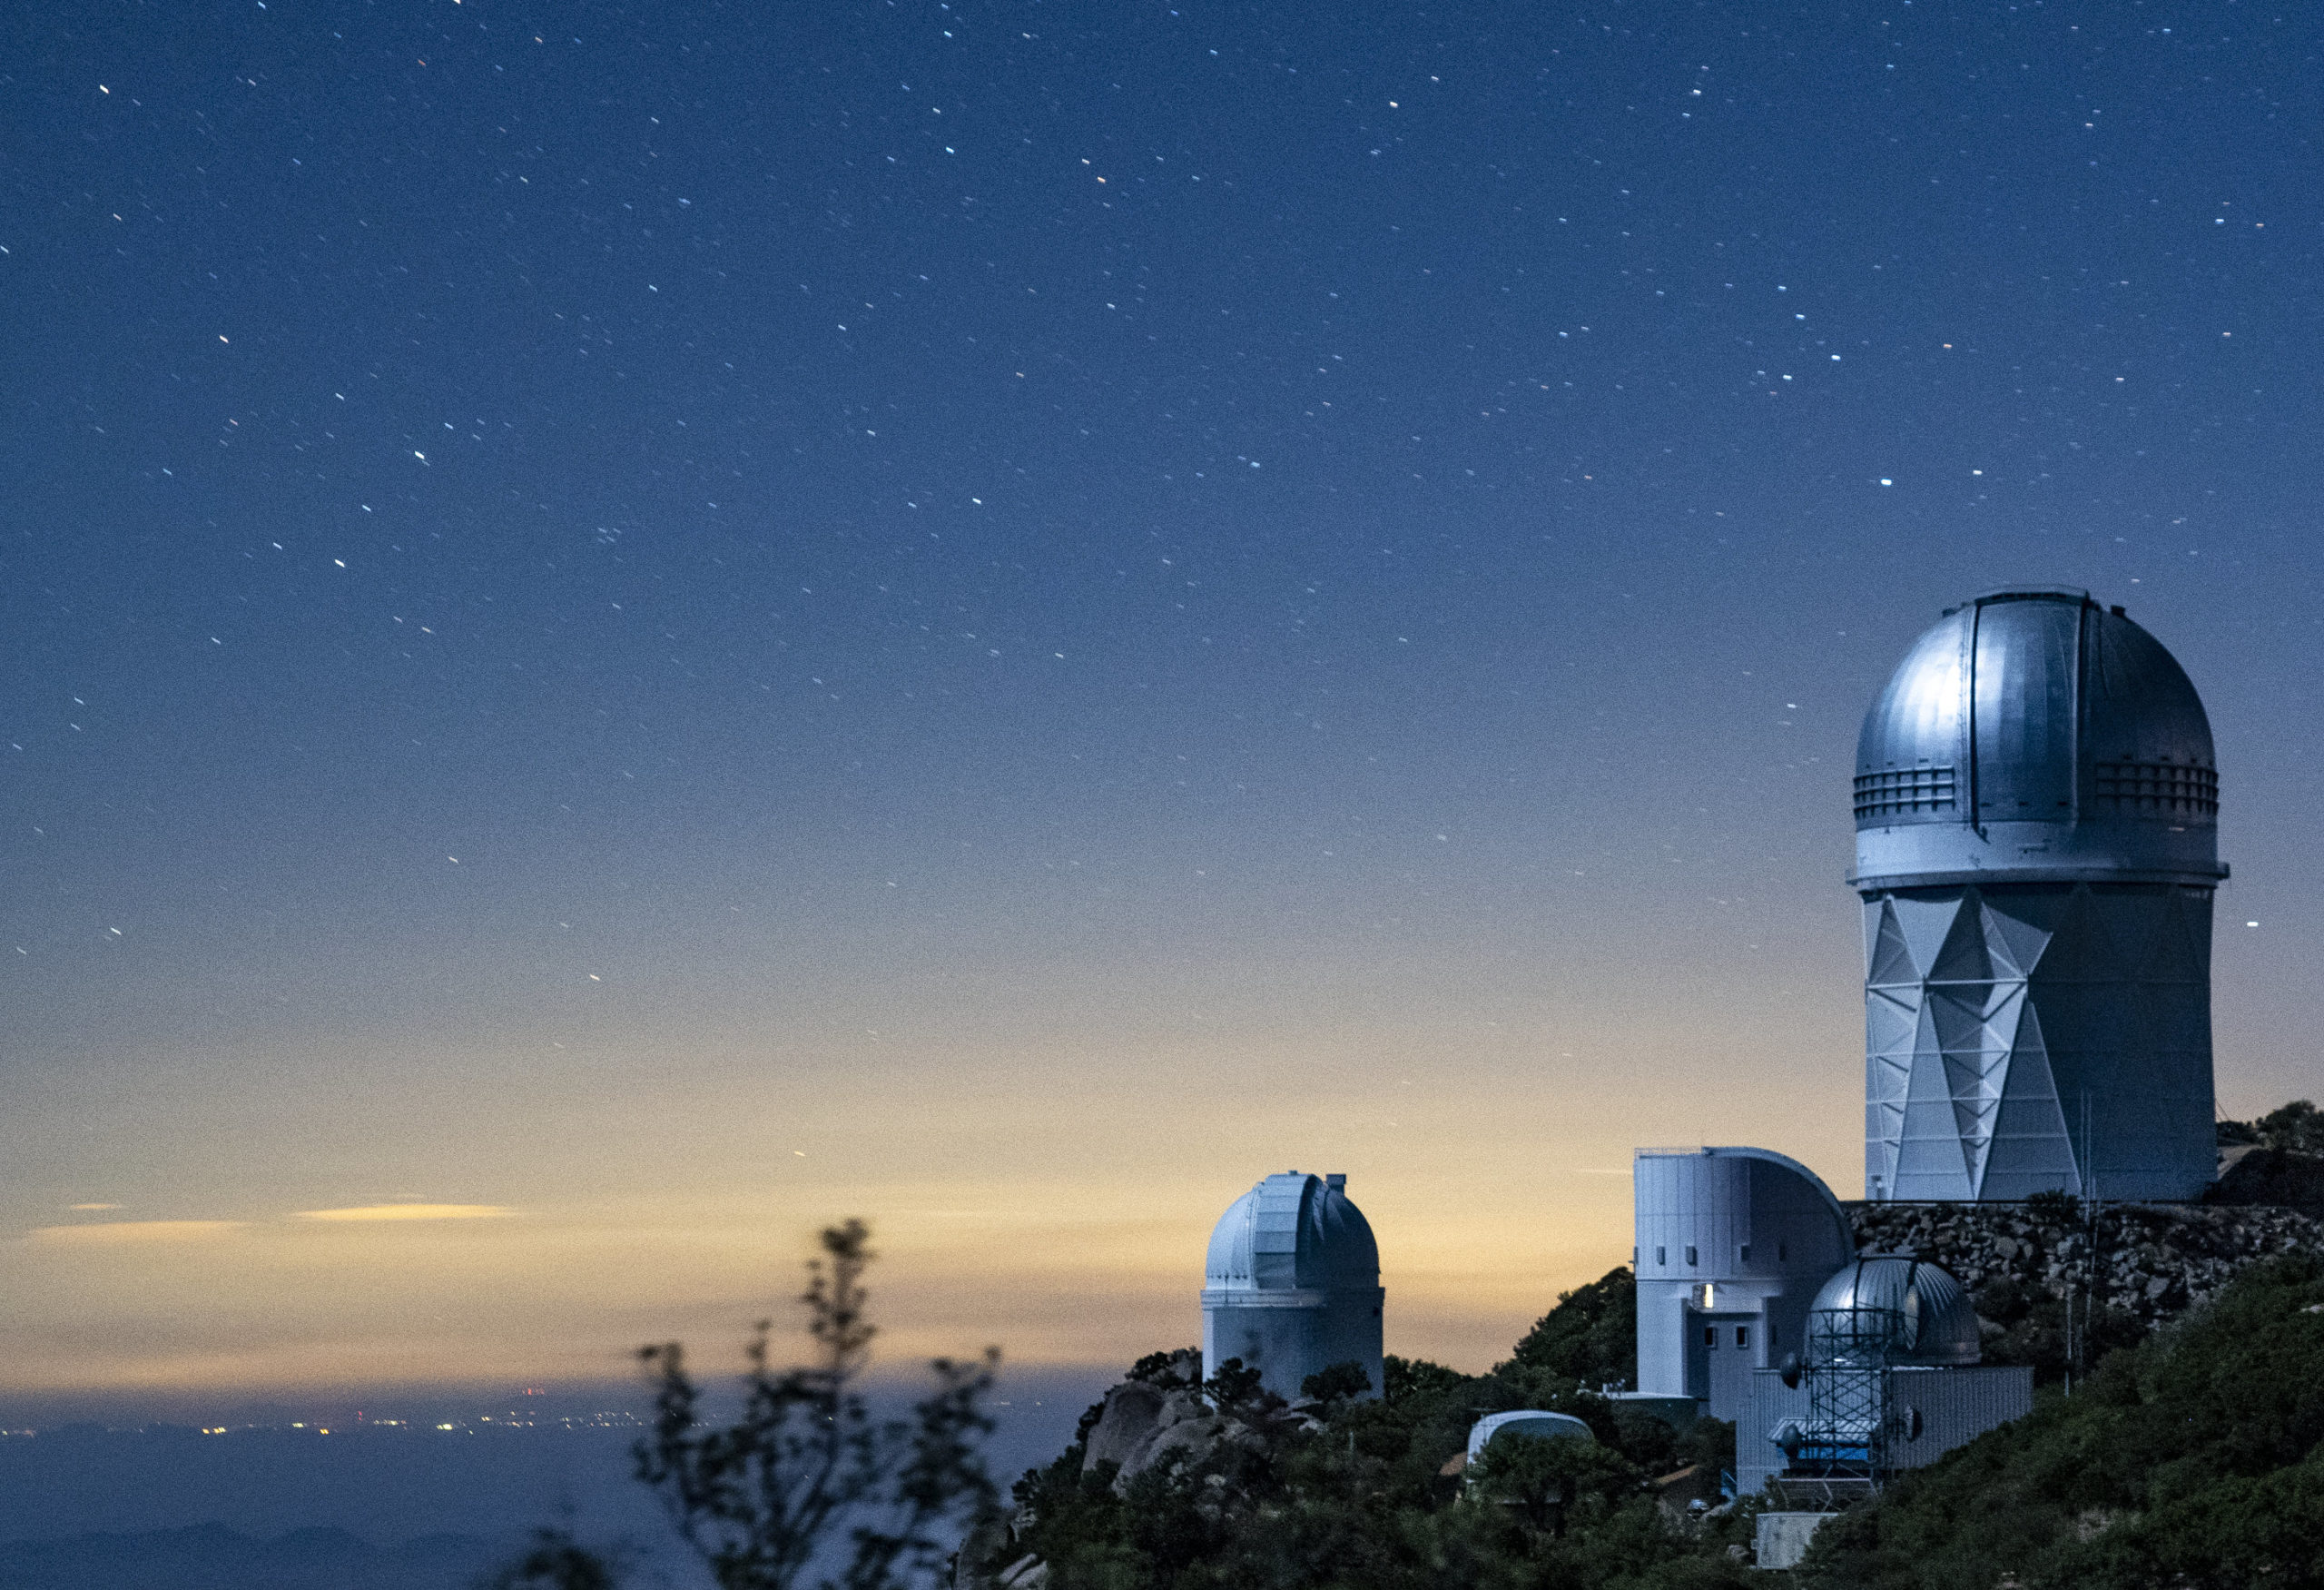 Photo - Kitt Peak National Observatory at dusk. DESI, the Dark Energy Spectroscopic Instrument, is housed within the Mayall Telescope dome (right). (Credit: Marilyn Sargent/Berkeley Lab)